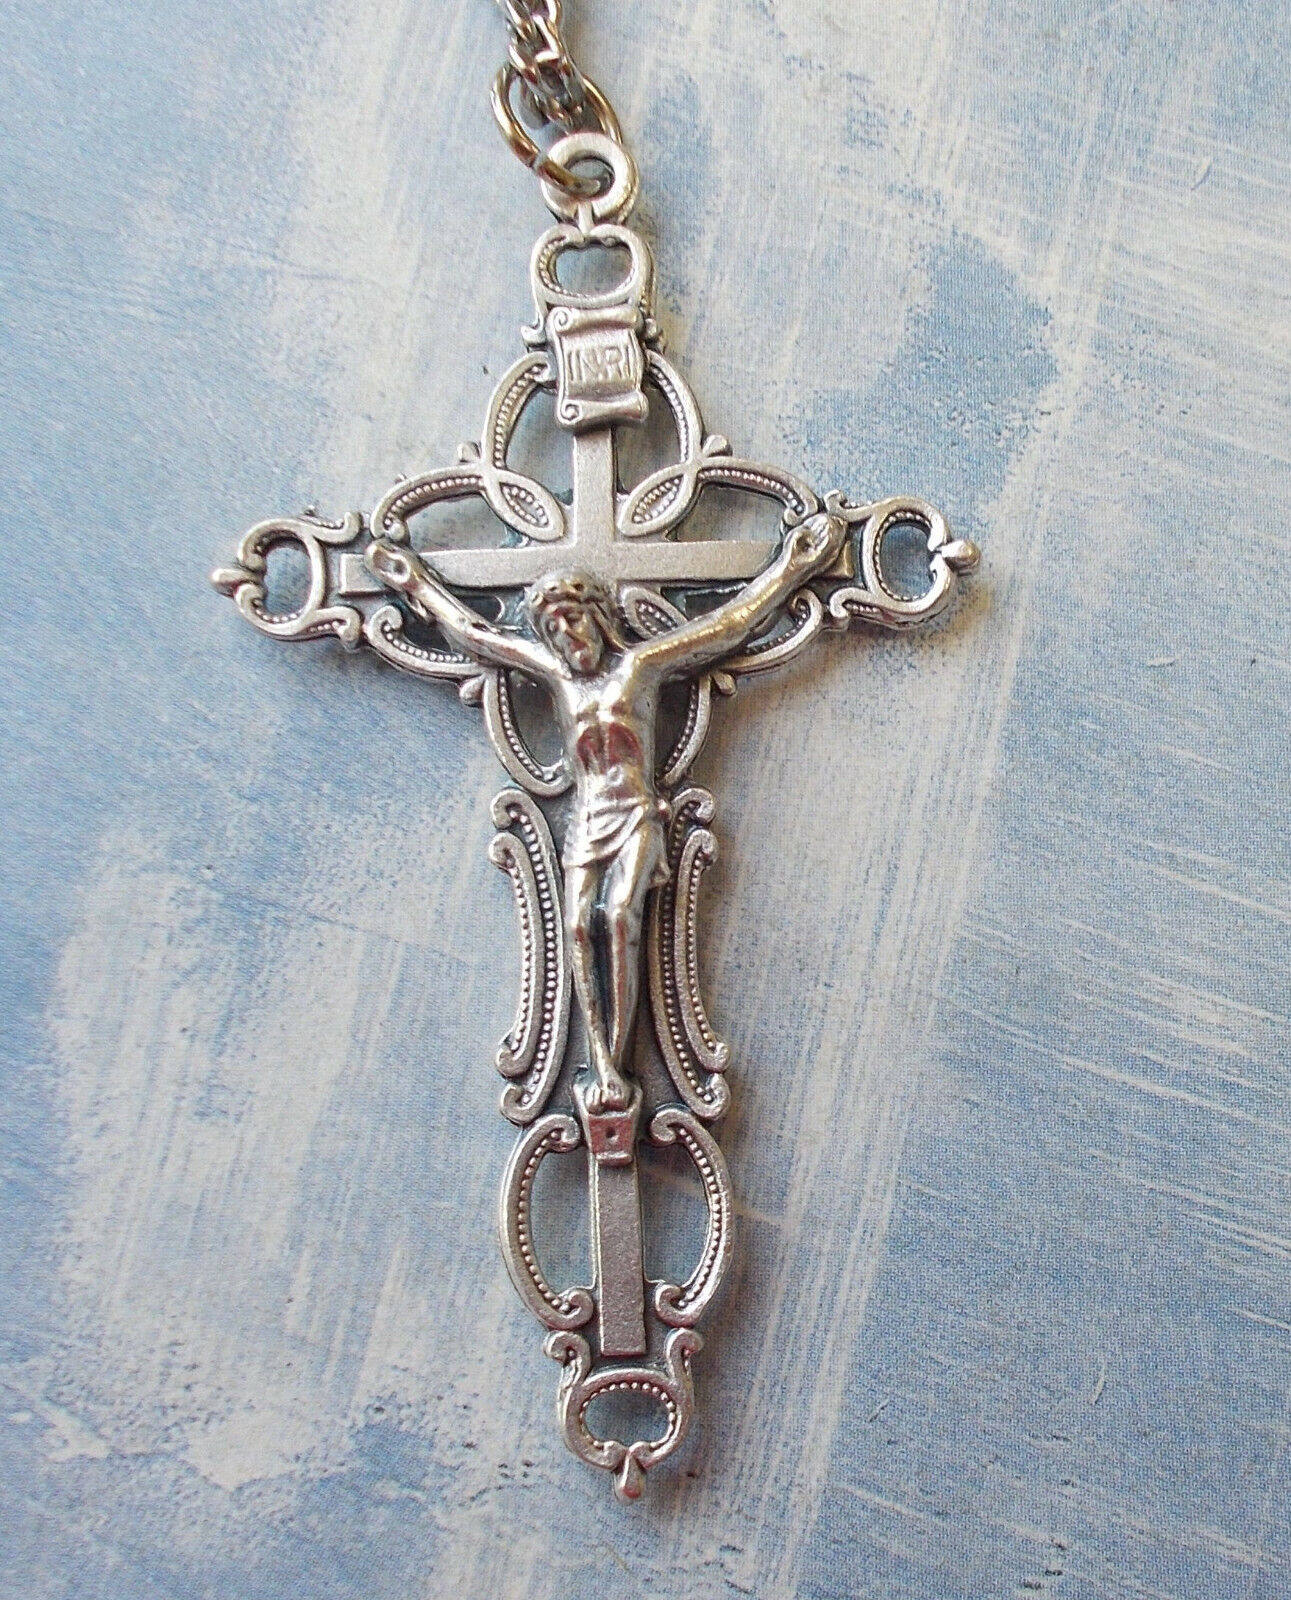 GORGEOUS ornate Catholic CRUCIFIX Pendant/Necklace~Stainless Steel chain~Italy~